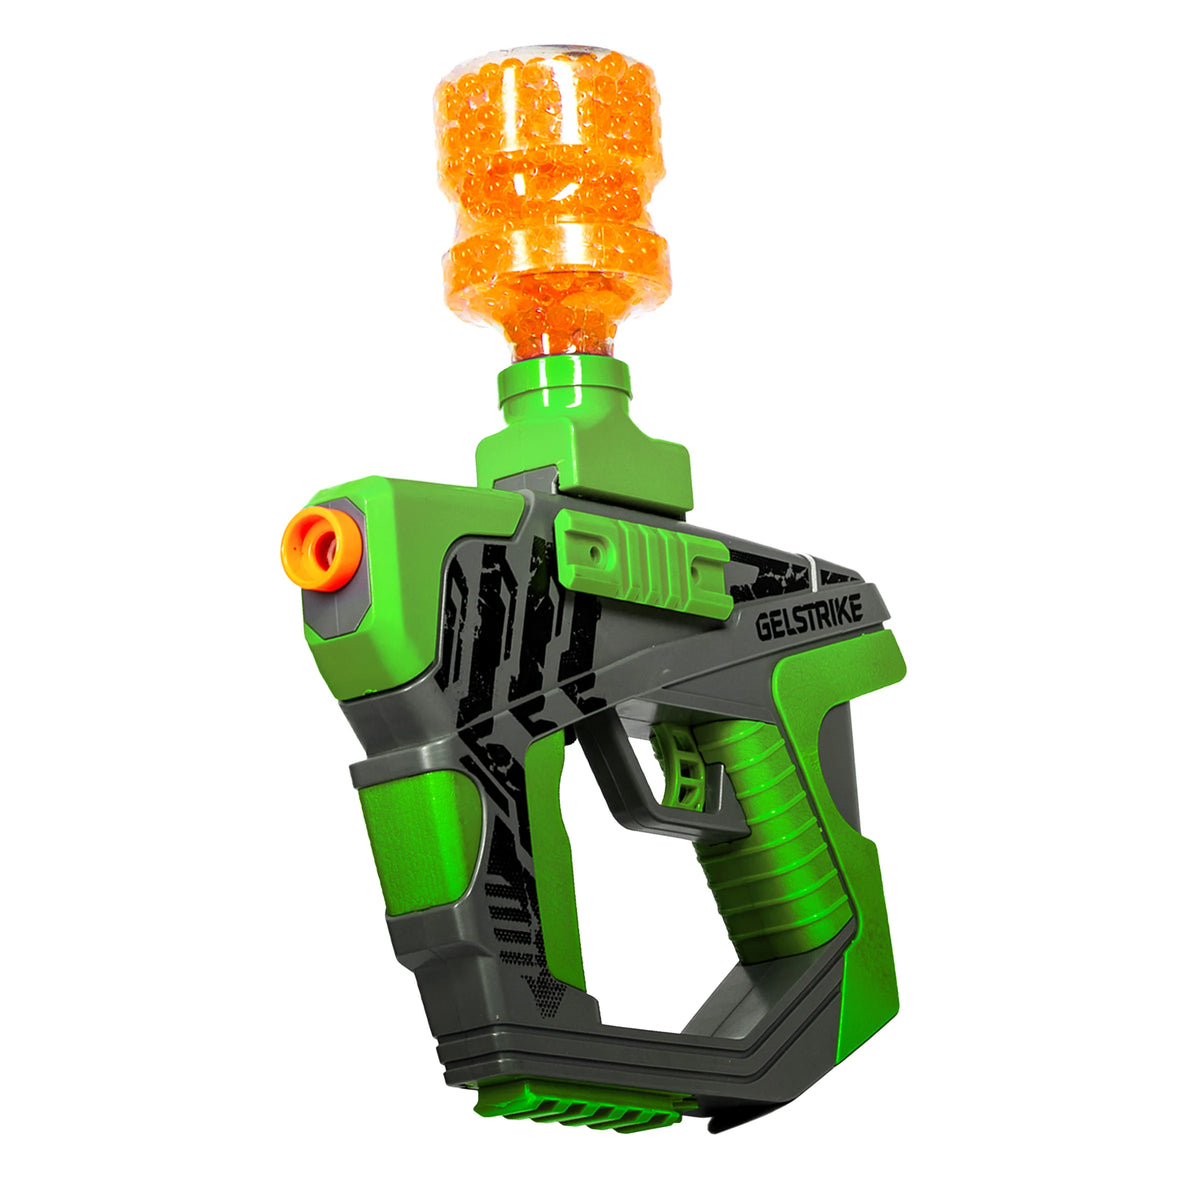 Gellyball kit with Laser | Delta Blaster | Gelstrike | Color: Electric Green